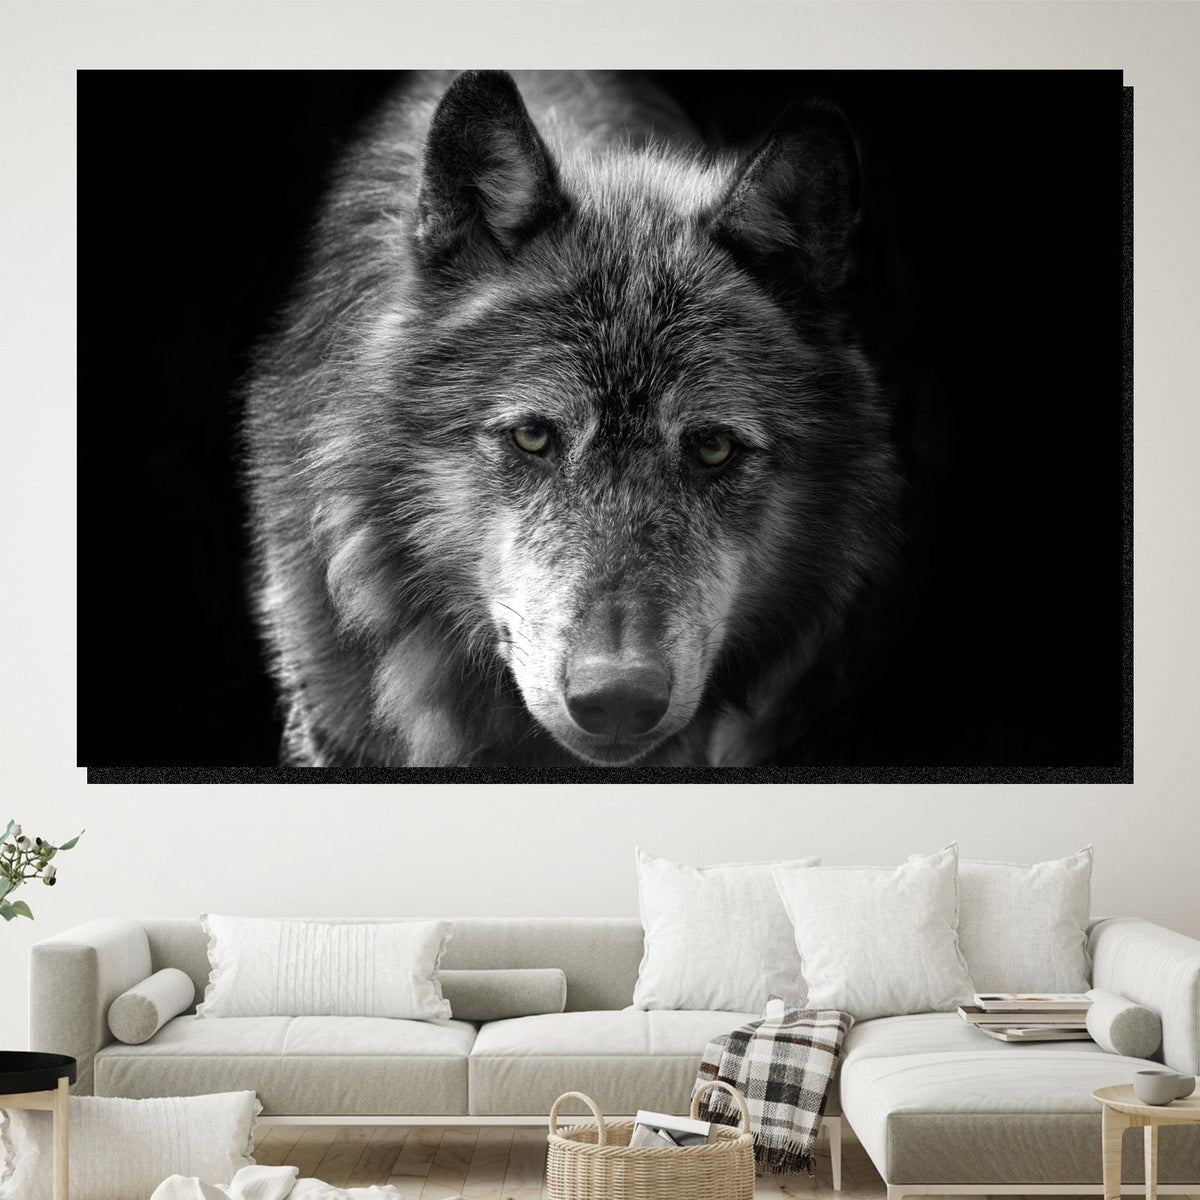 https://cdn.shopify.com/s/files/1/0387/9986/8044/products/IberianWolfCanvasArtprintStretched-4.jpg